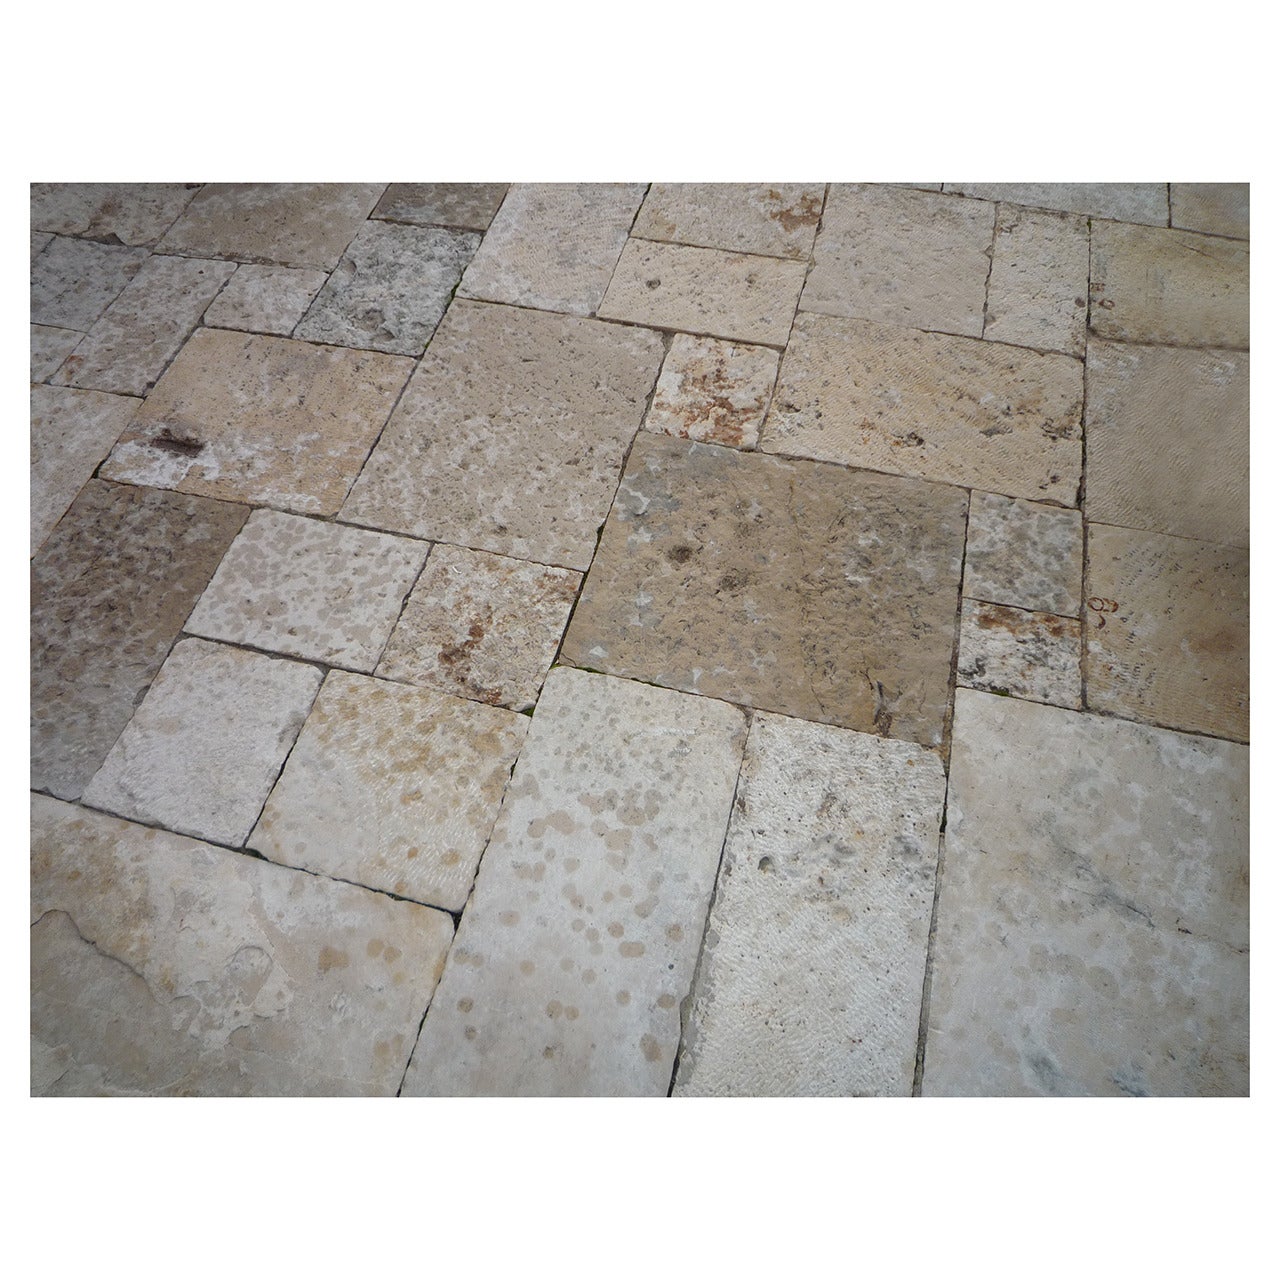 Antique Reclaimed Dalles de Bourgogne Recycled  Stone Flooring,  Excellent Condition, Perfectly  and Restored , reduced thickness of  2 inch ( 5 cm ) , ready to be mounted, Stock For Sale age 17th Century circa,
( Price per one sq mt )  = 11 sft